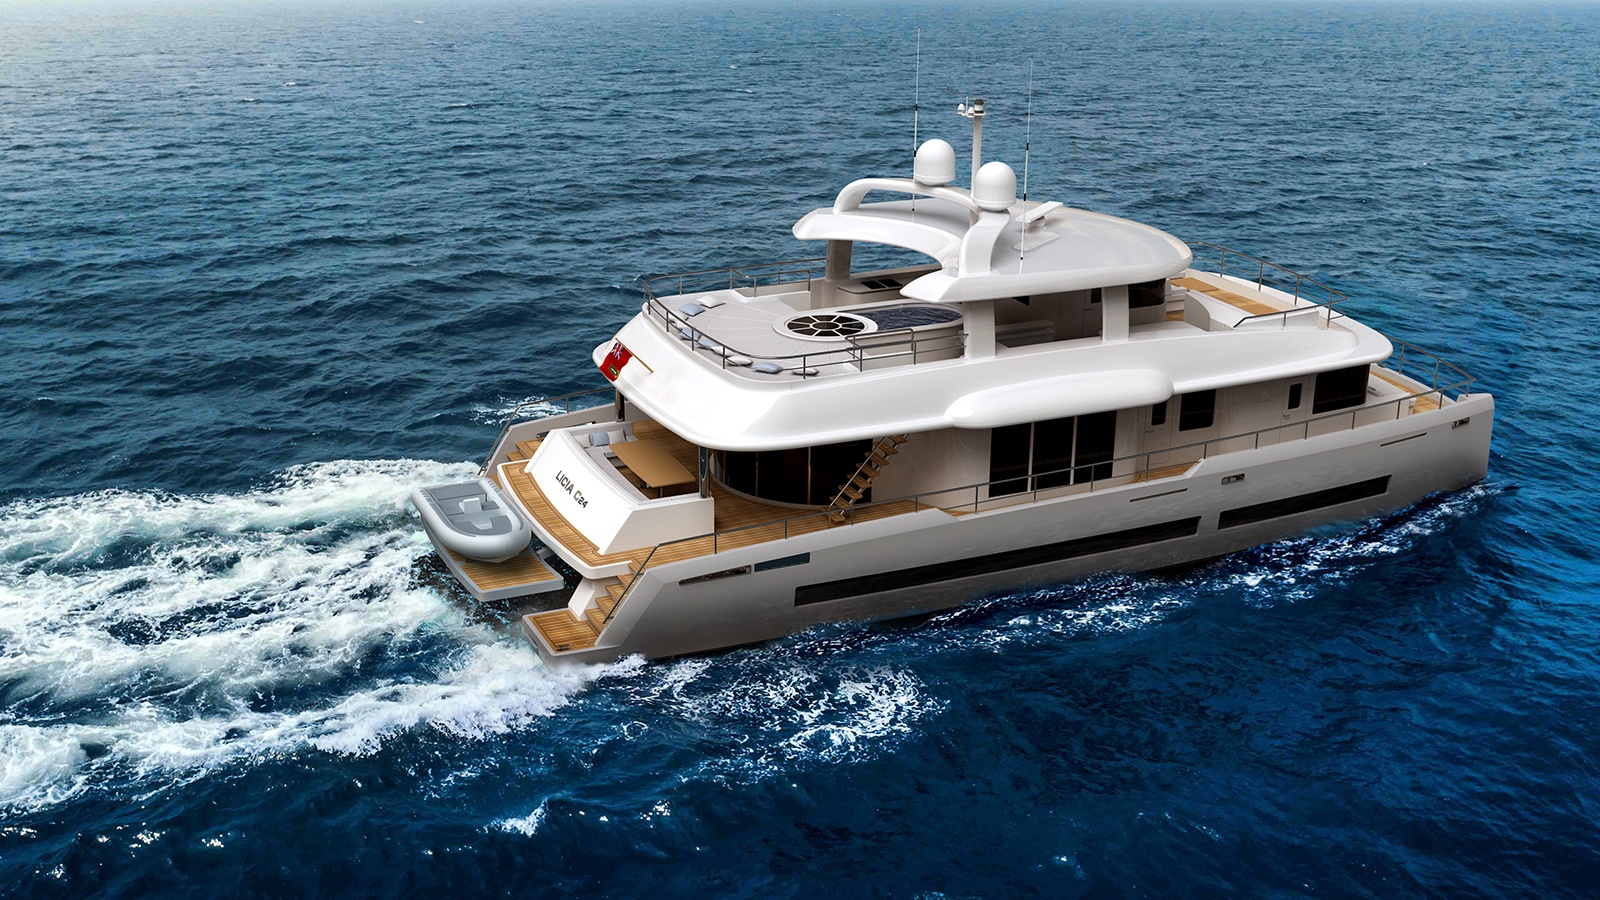 licia yachts unveils new 24 metre power catamaran concept for expeditions yacht charter superyacht news